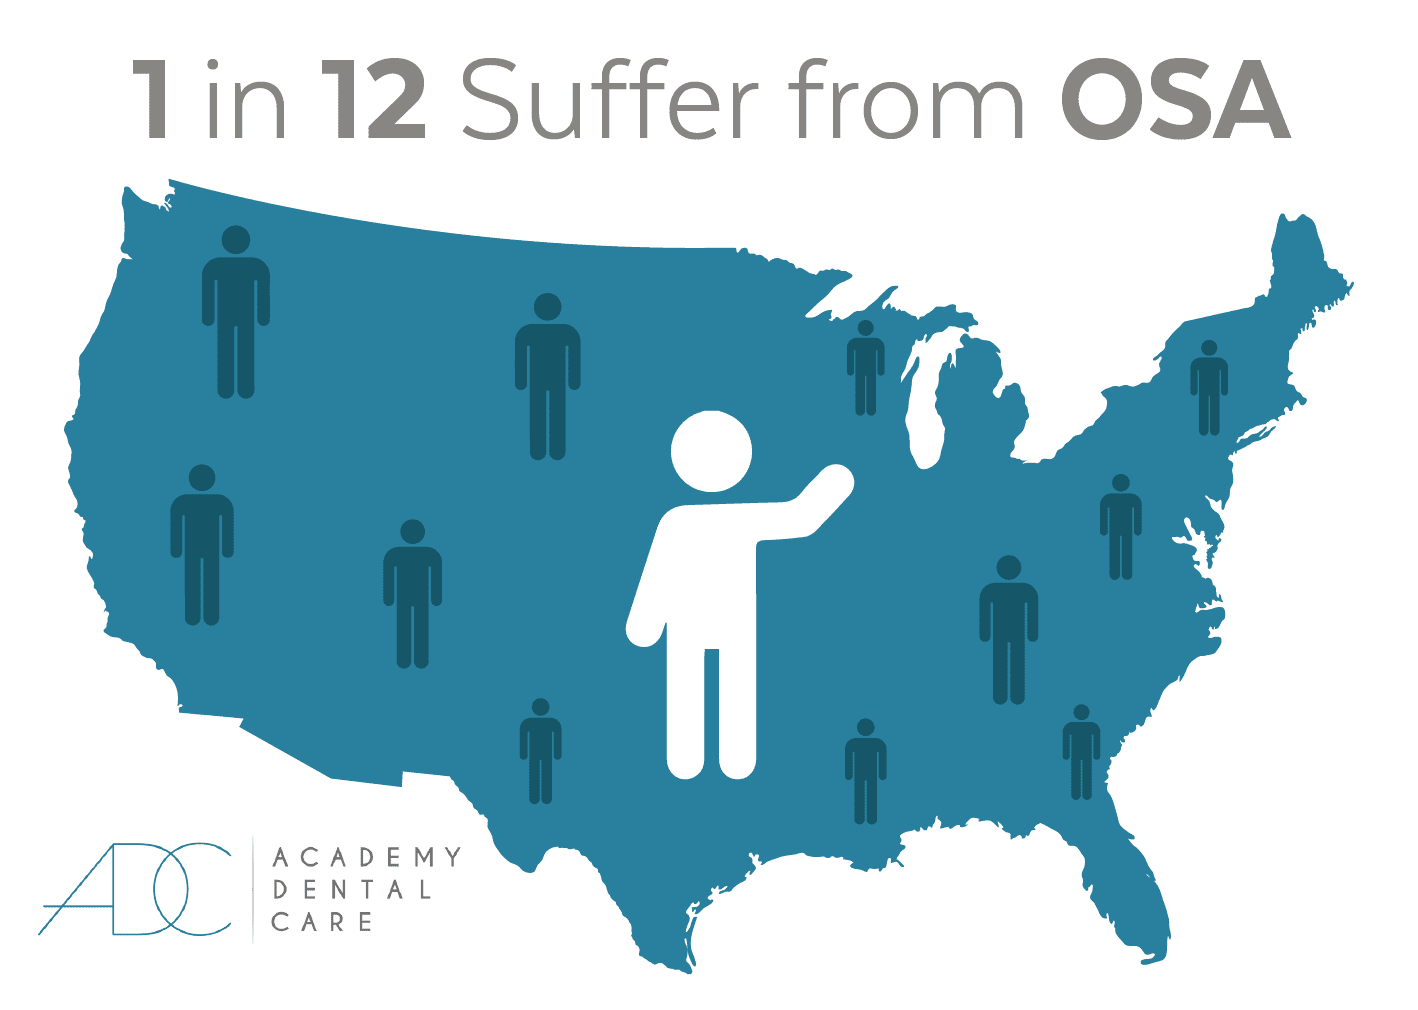 1 in 12 Suffer from OSA